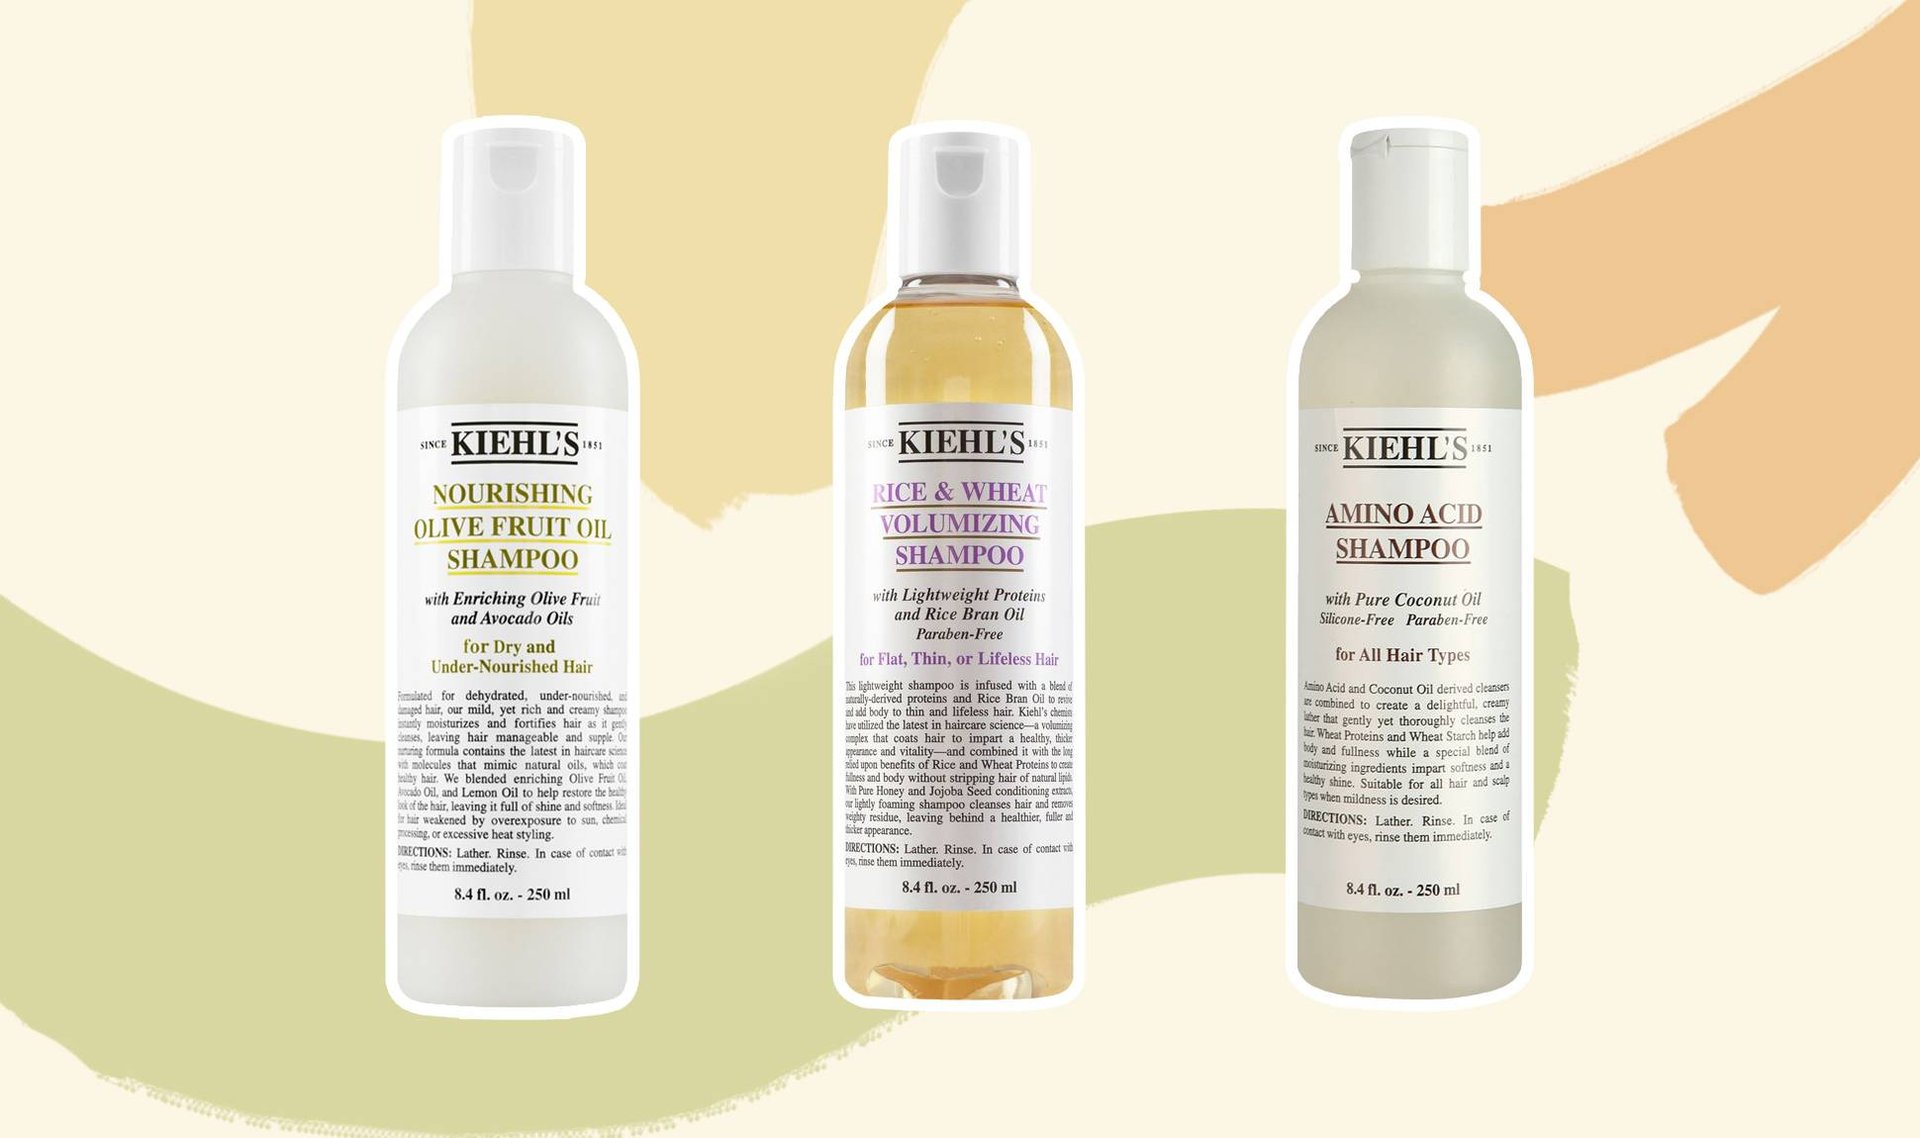 I Tried 4 Top-Rated Kiehl's Shampoos — Here Are My Thoughts